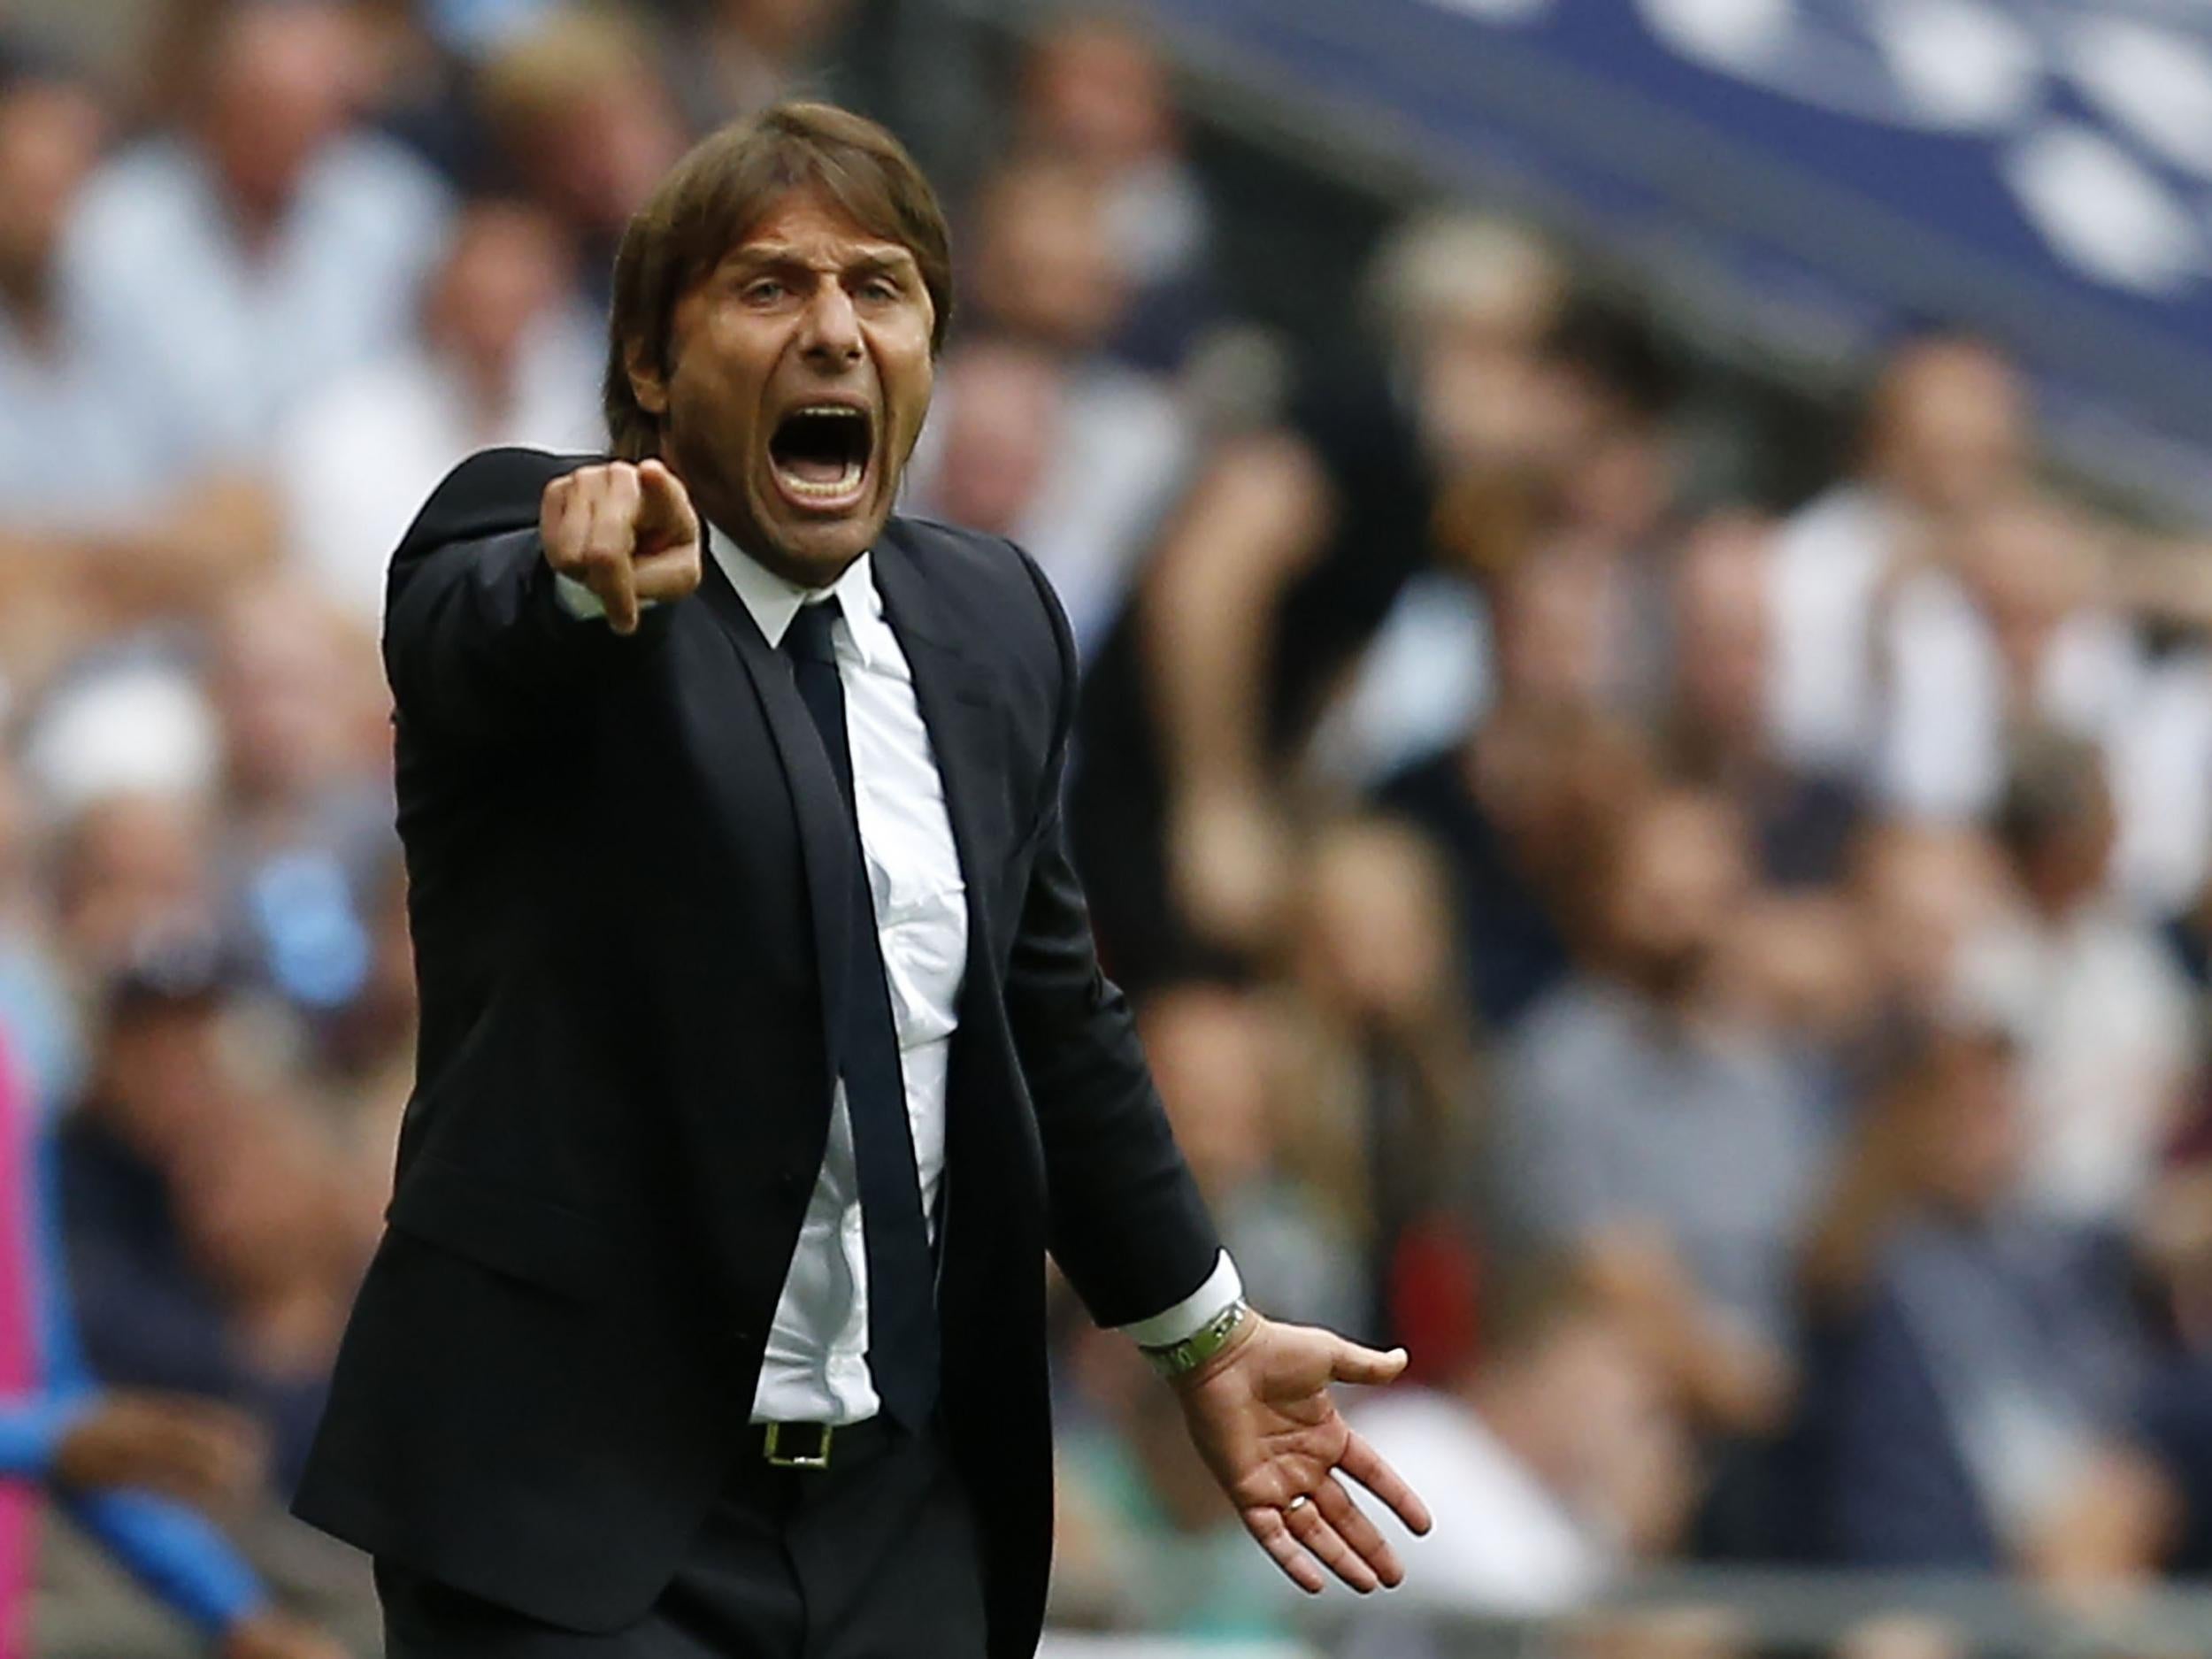 Antonio Conte reached the quarter-finals of the Champions League with Juventus